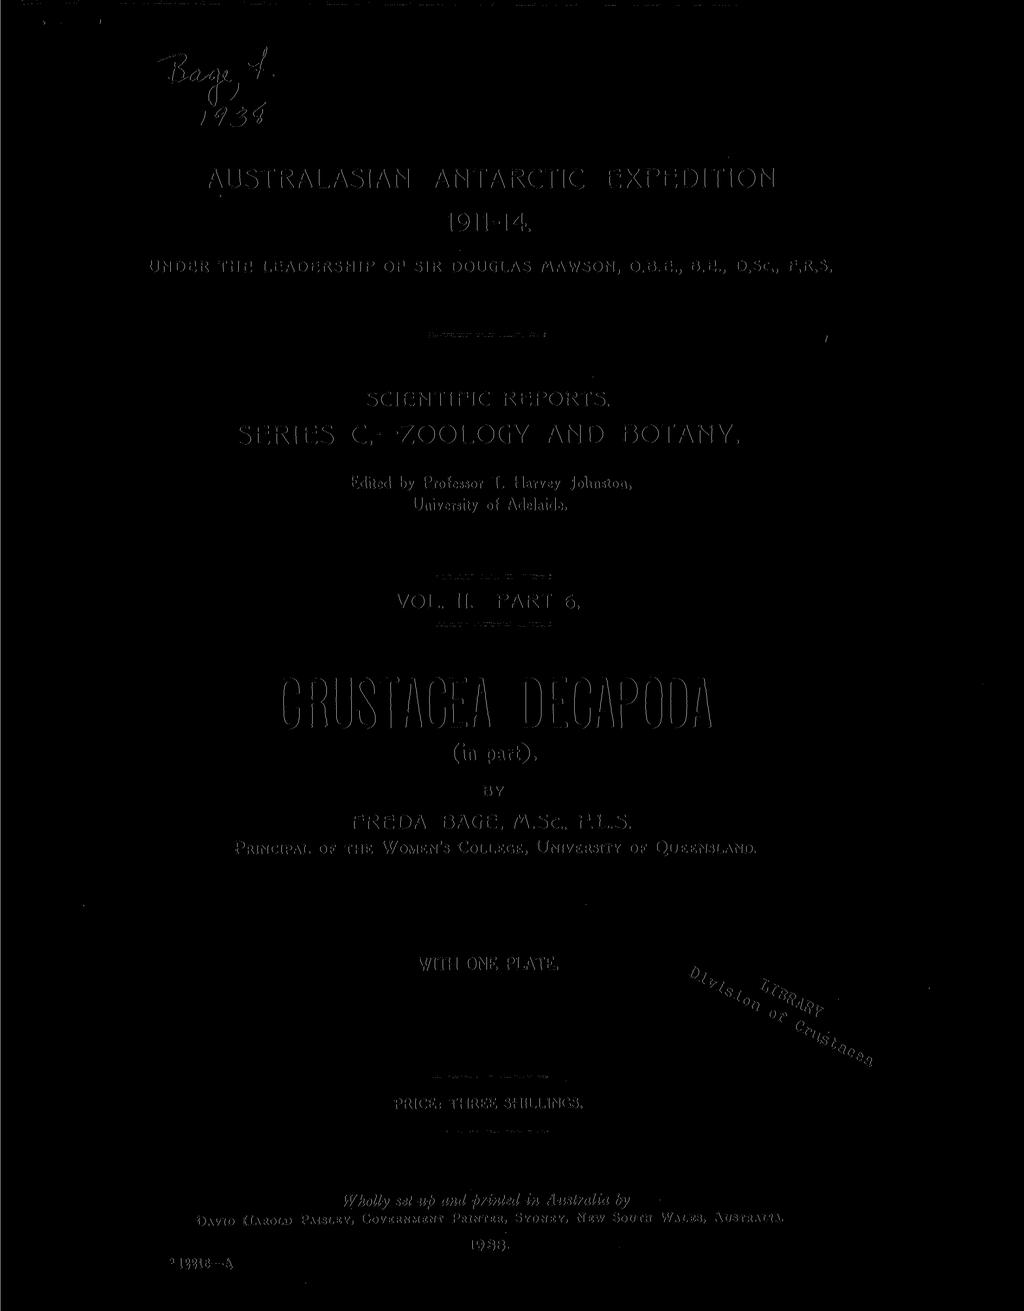 ) AUSTRALASIAN ANTARCTIC EXPEDITION 1911-14. UNDER THE LEADERSHIP OP SIR DOUGLAS ttawson, O.B.E., B.E., D.Sc., F.R.S. _ 1 SCIENTIFIC REPORTS. SERIES c ZOOLOGY AND BOTANY. Edited by Professor T.